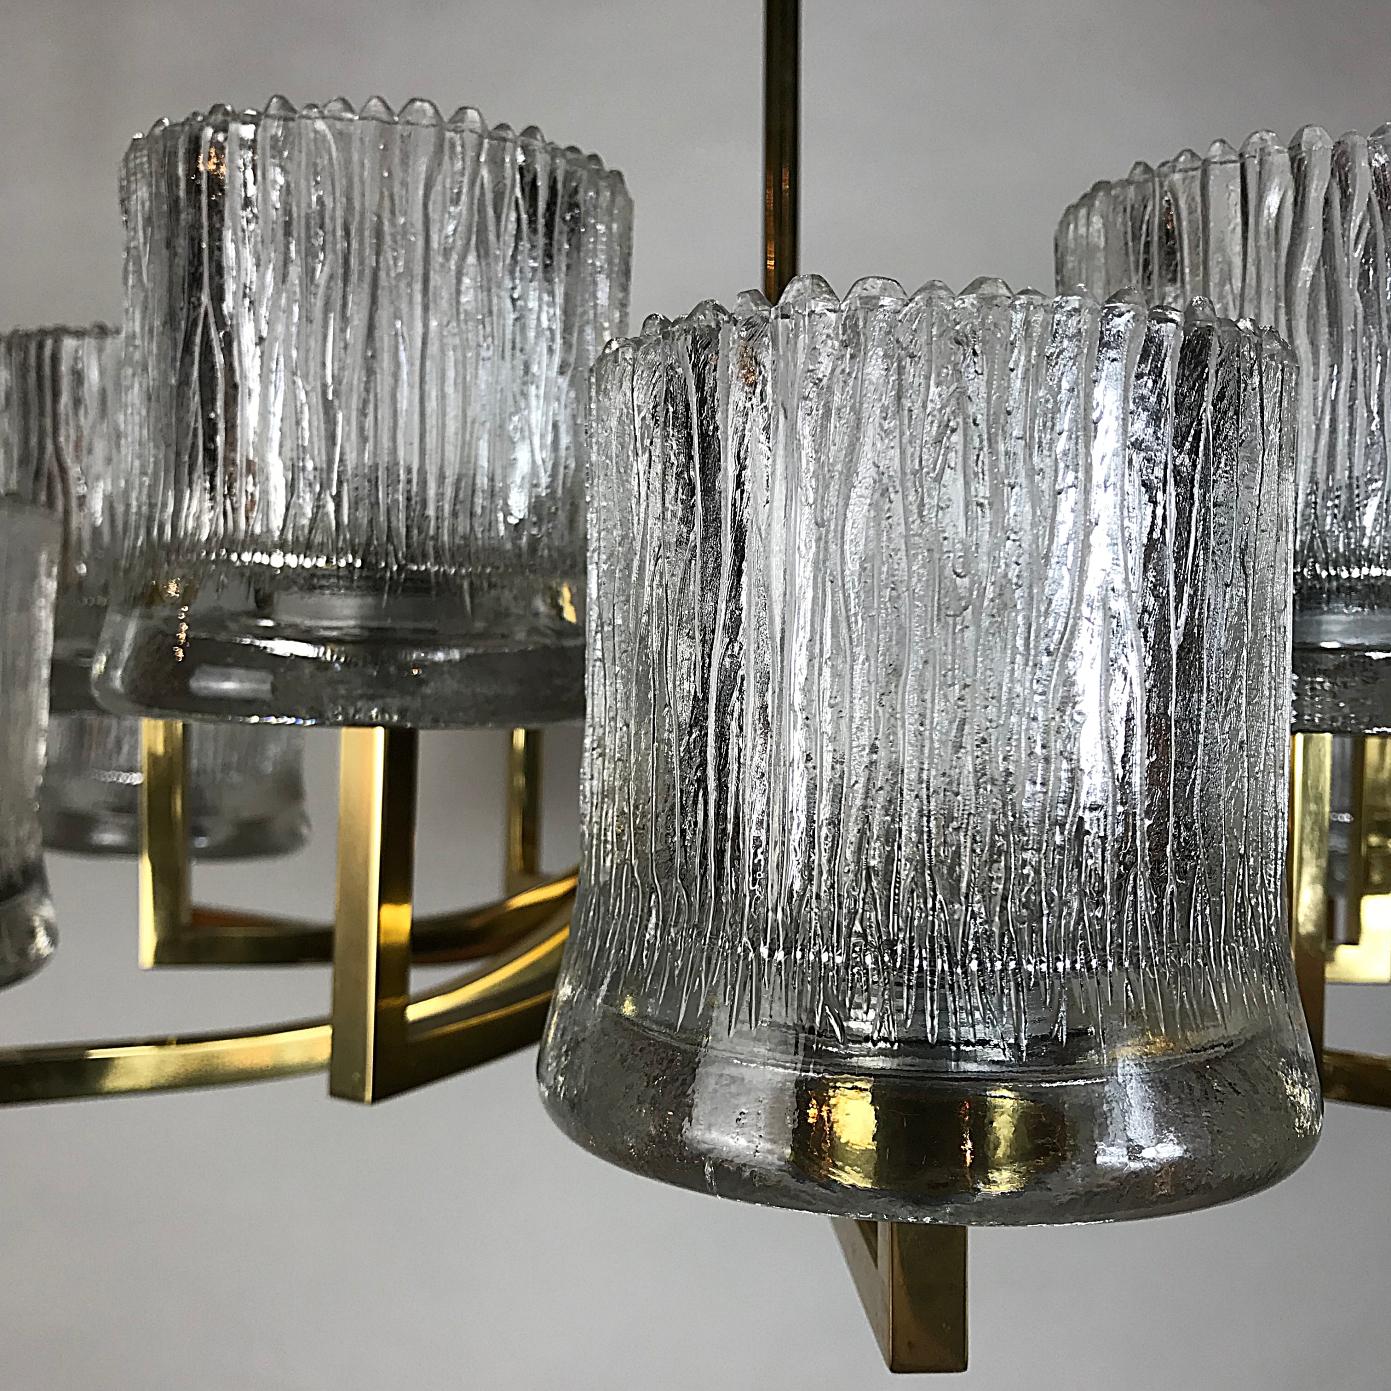 Polished Hillebrand Midcentury Spider Chandelier Ice Glass & Brass, 1960s, Germany For Sale